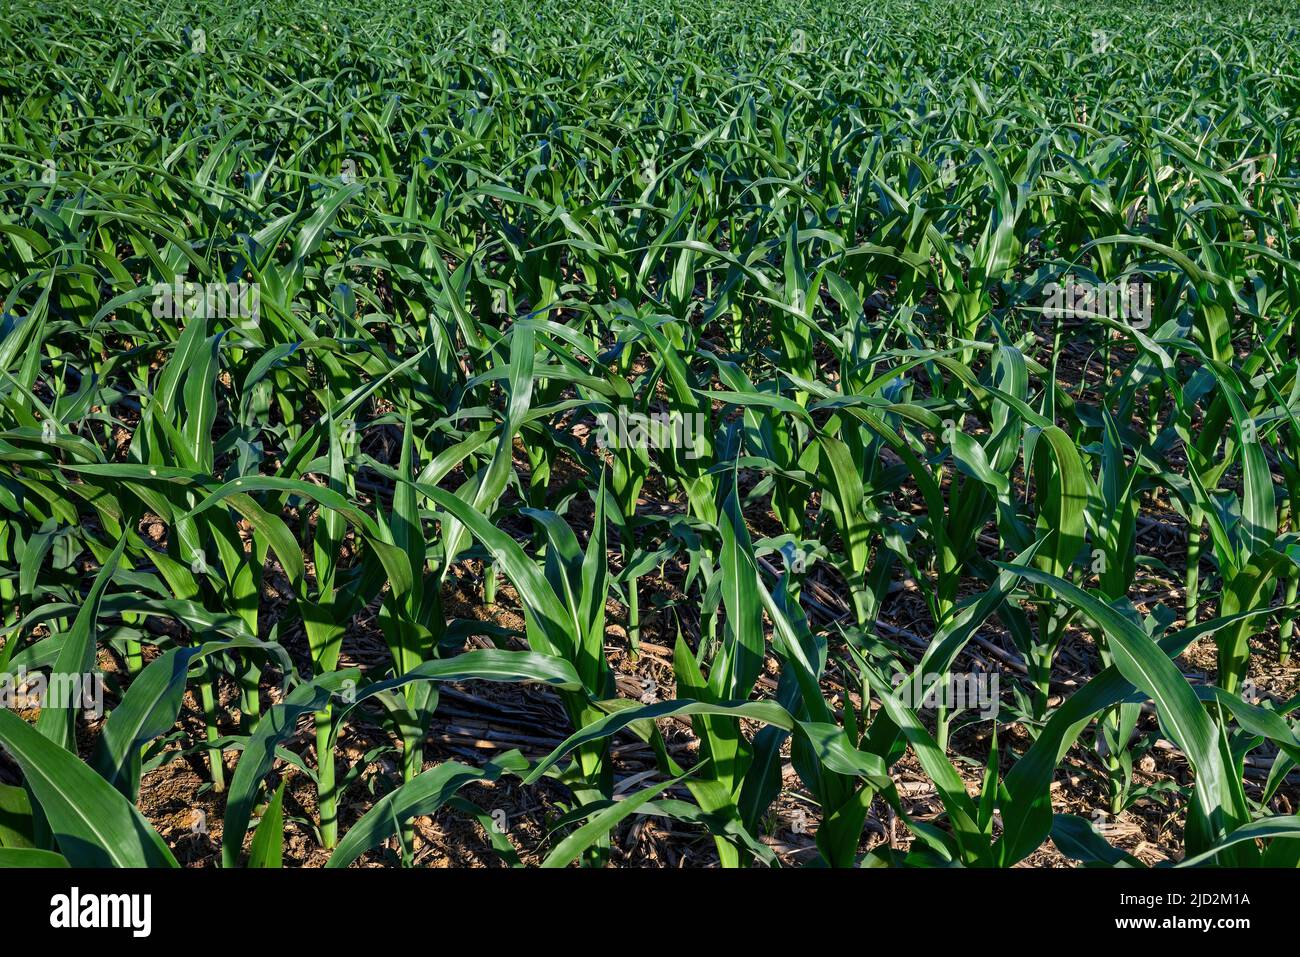 Corn or maize growing in the field in late day sun. It is a staple food in many parts of the world and used to feed livestock Stock Photo